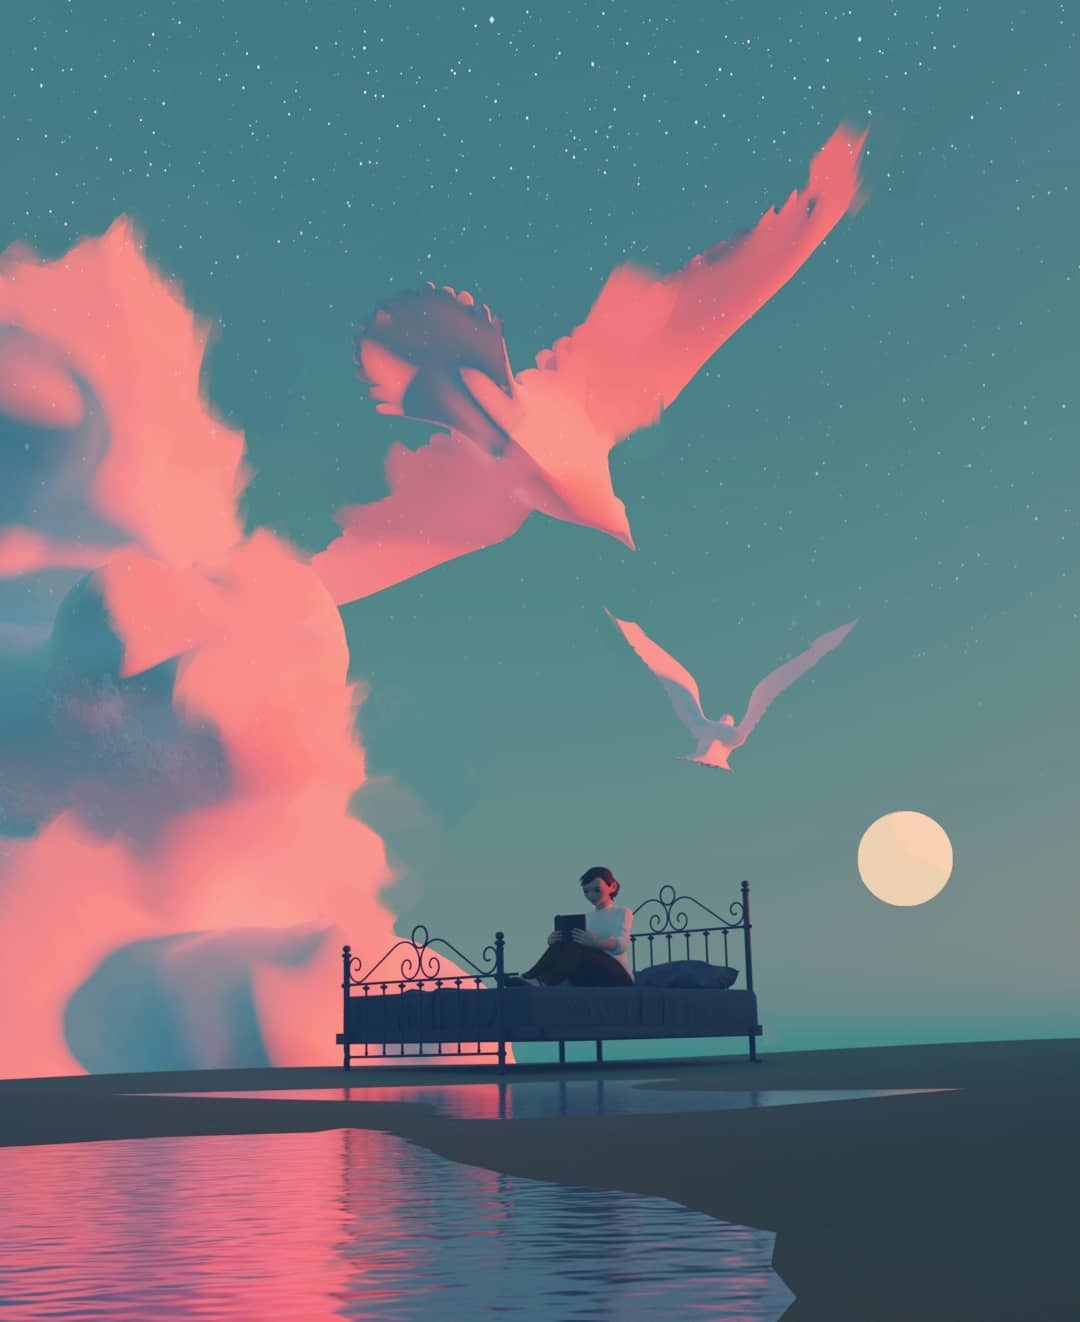 Dreamy And Ethereal Illustrations By Bryn Jones 6